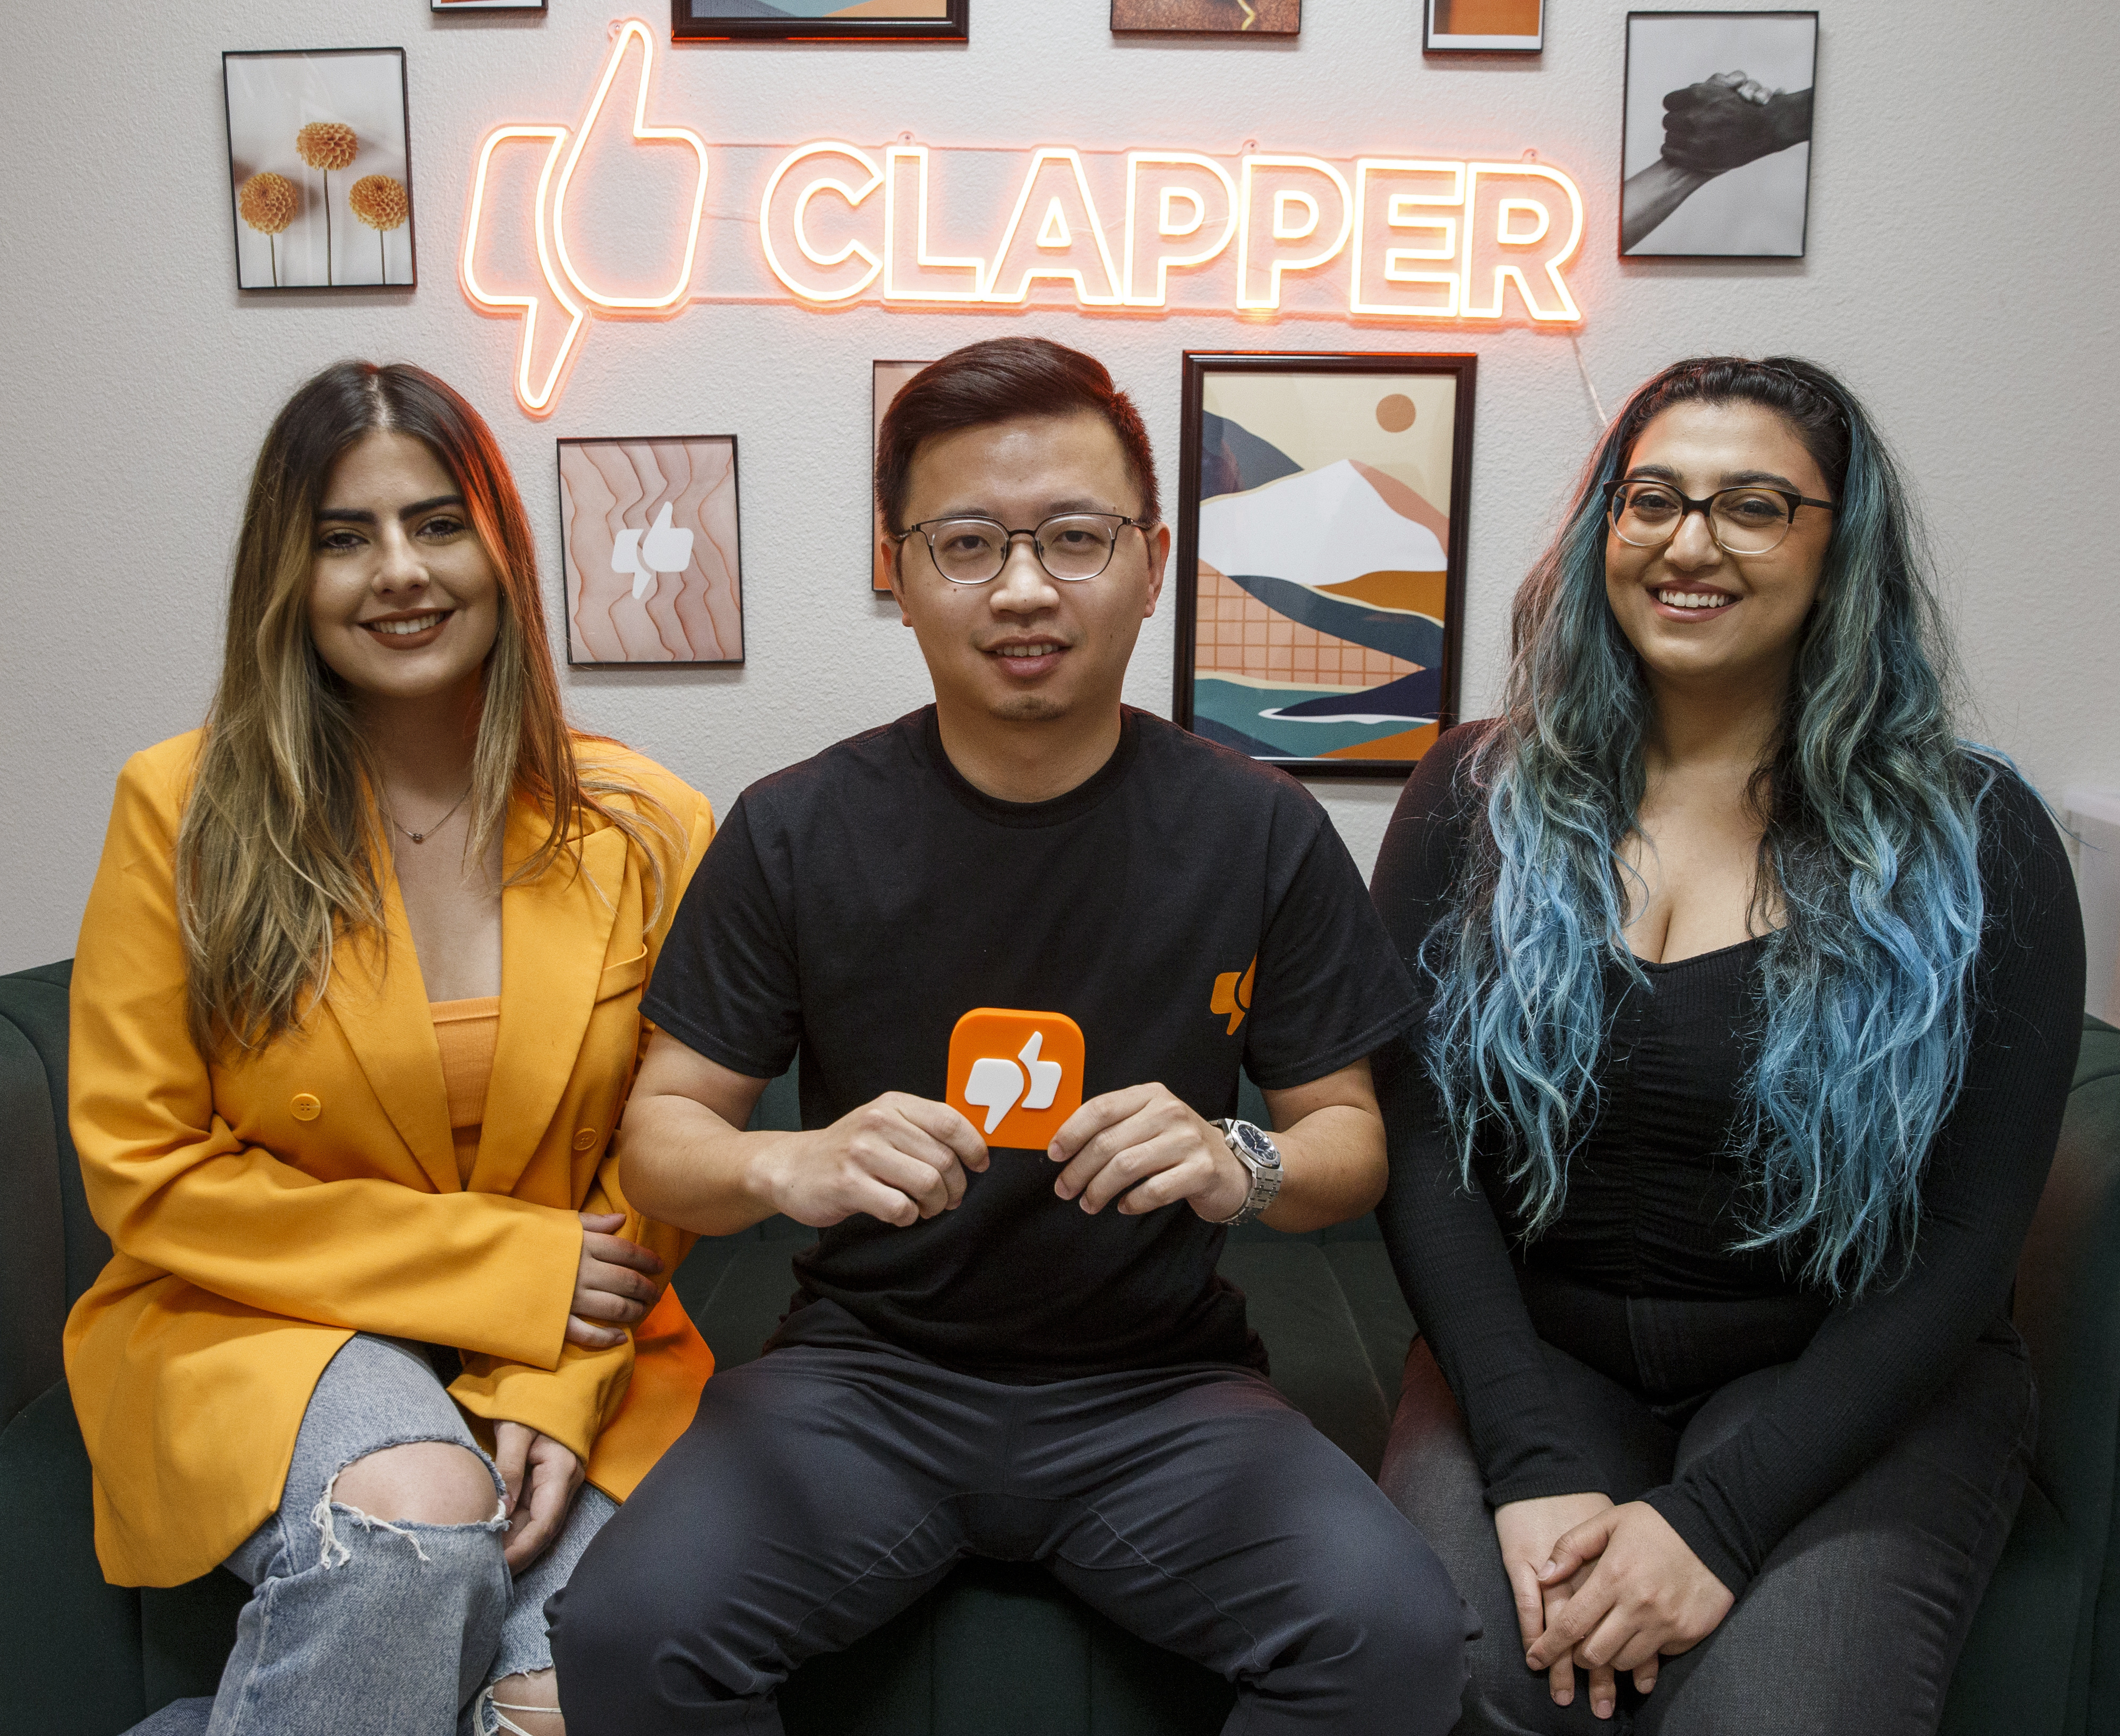 Built in North Texas, Clapper app finds new users as TikTok